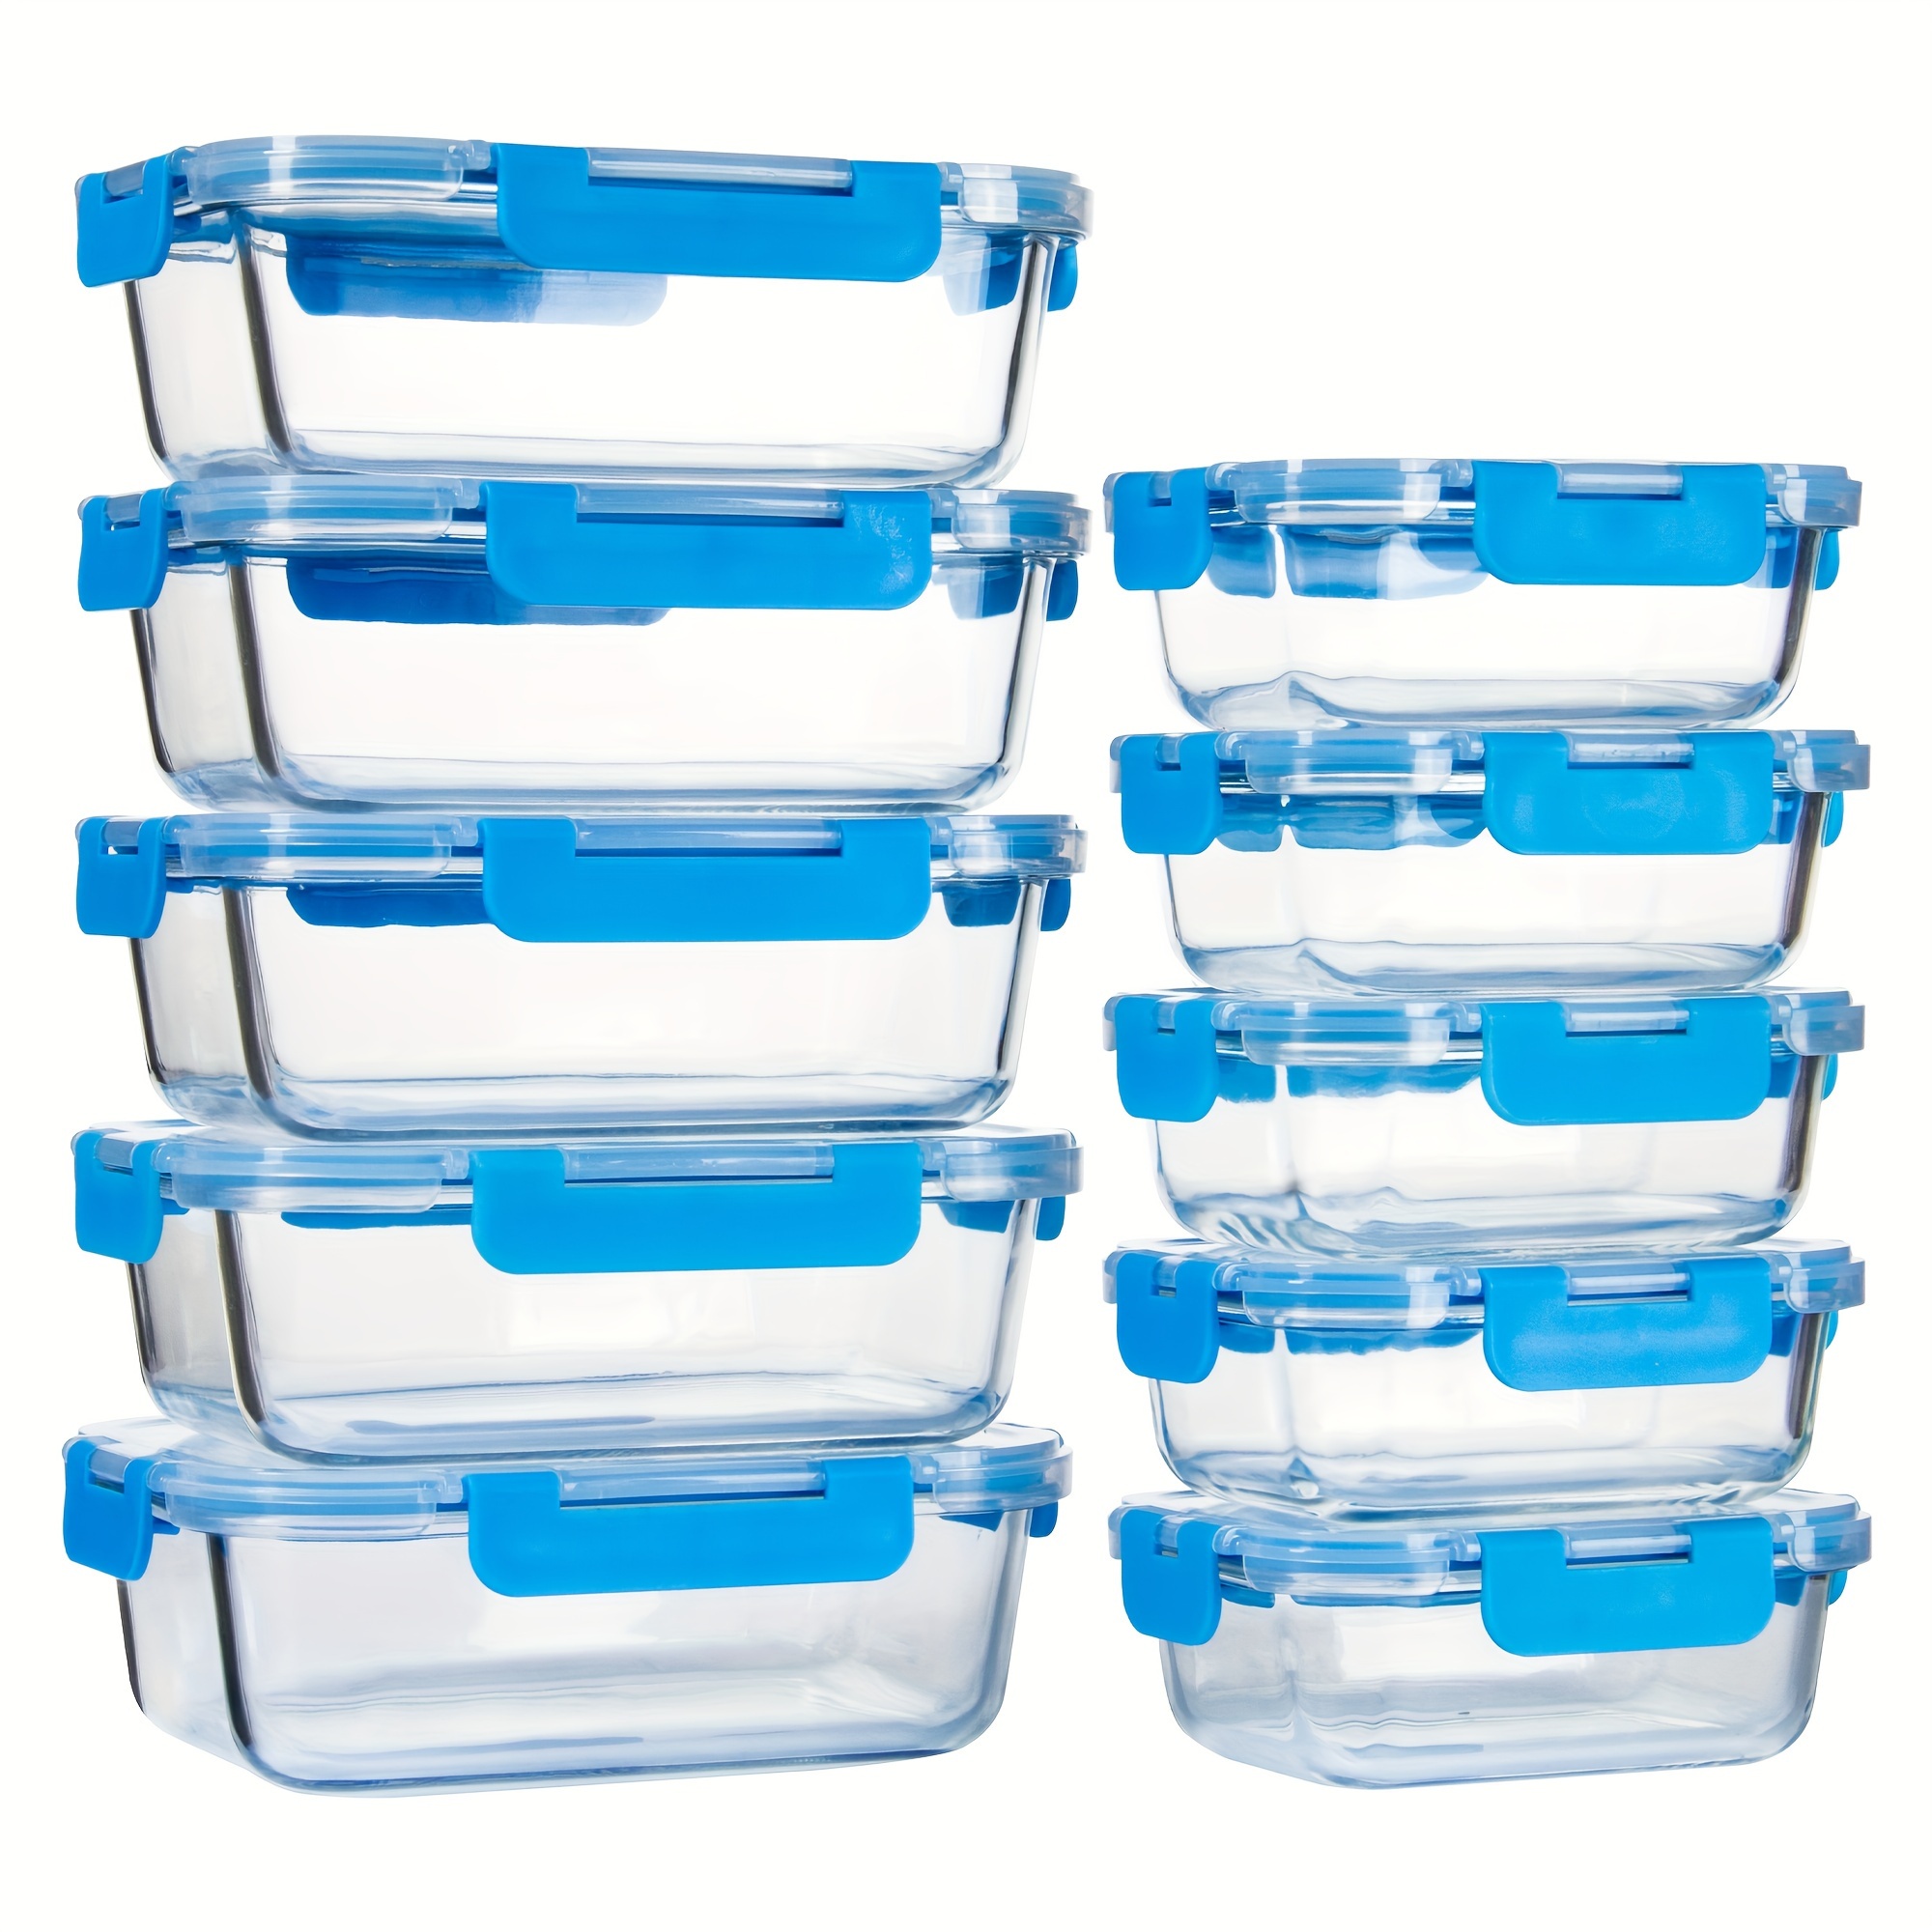 

[10-pack] Glass Meal Prep Containers Set, Food Storage Containers With Airtight Lids, Glass Lunch Boxes For Home Kitchen Office Lunch